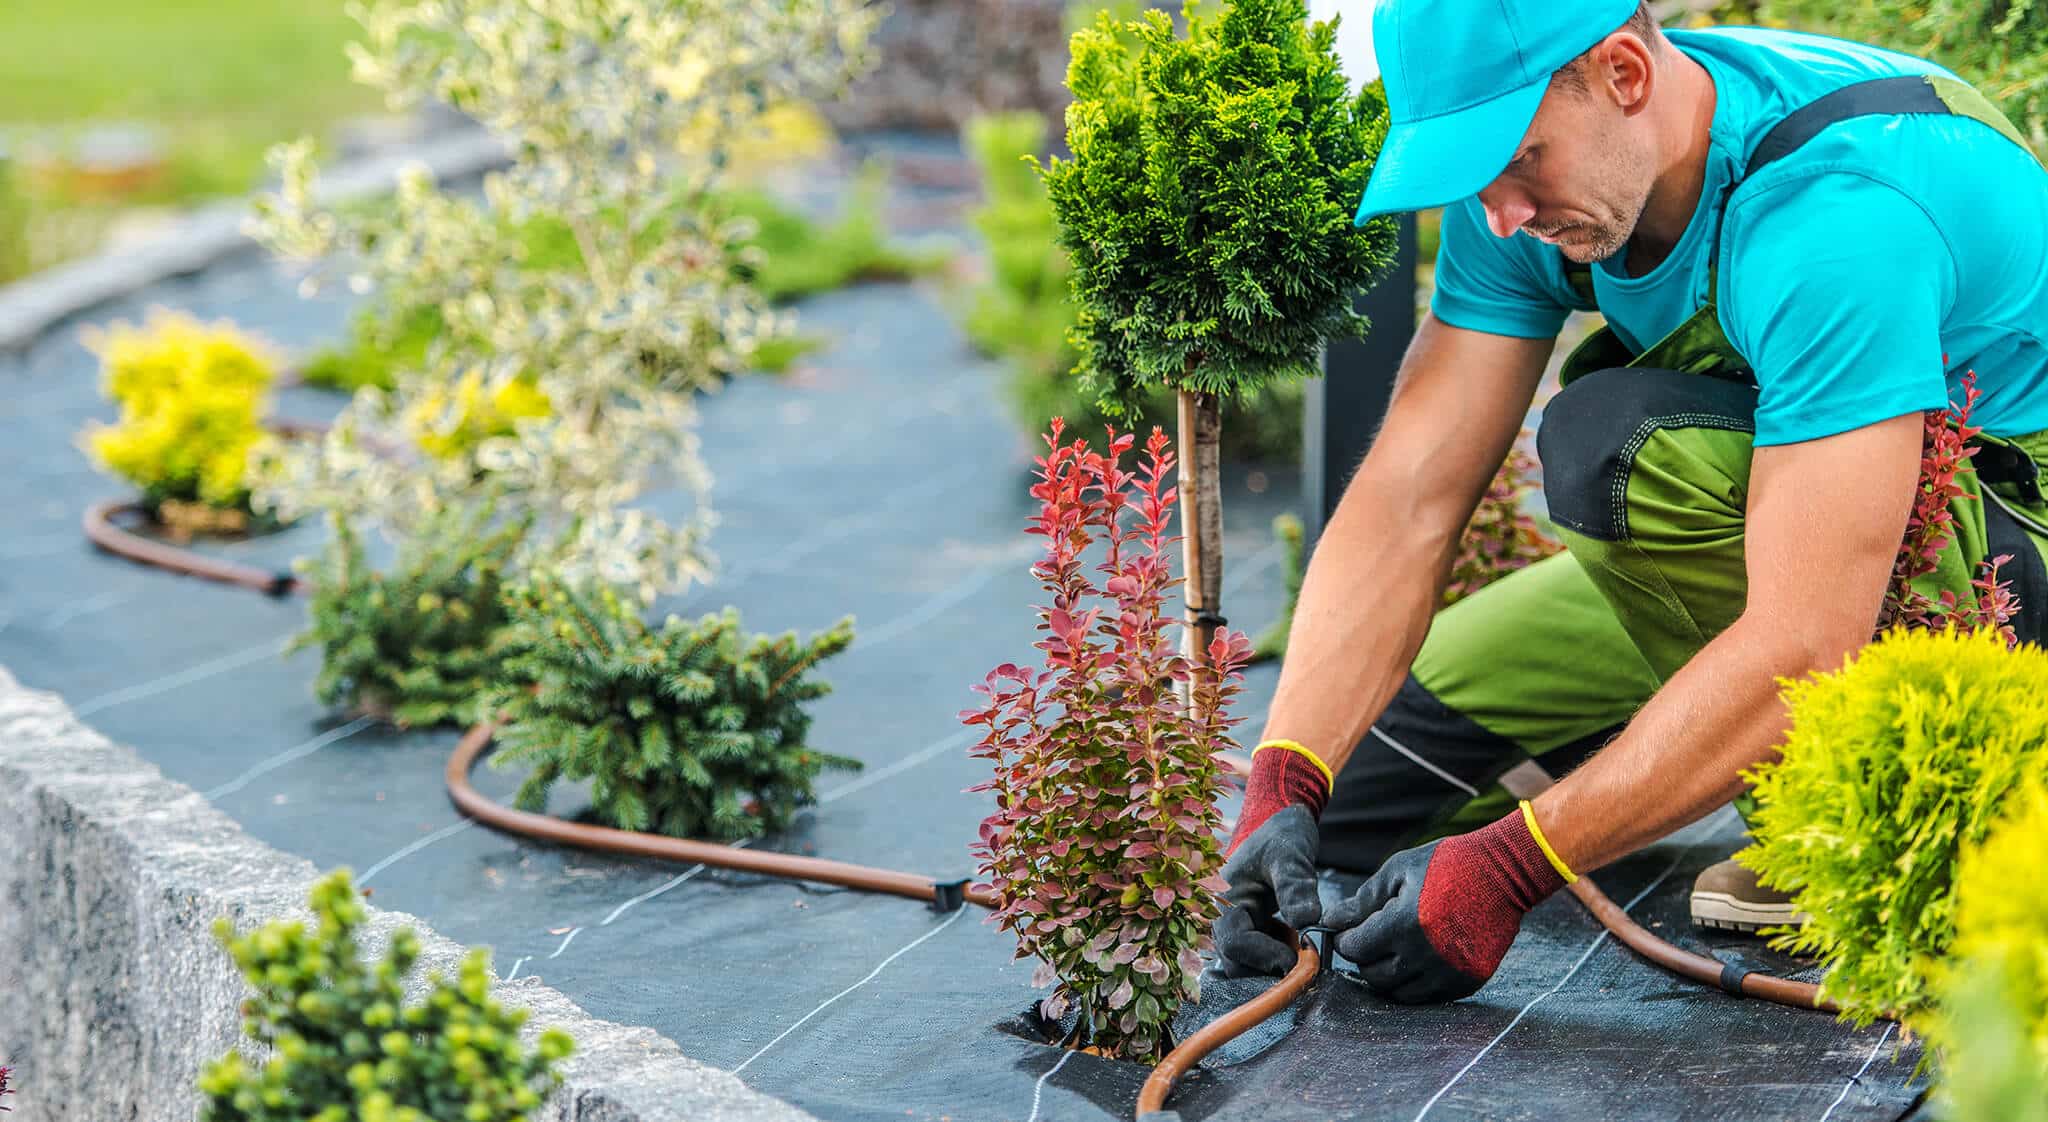 How Much Money Do You Need To Start A Landscaping Business